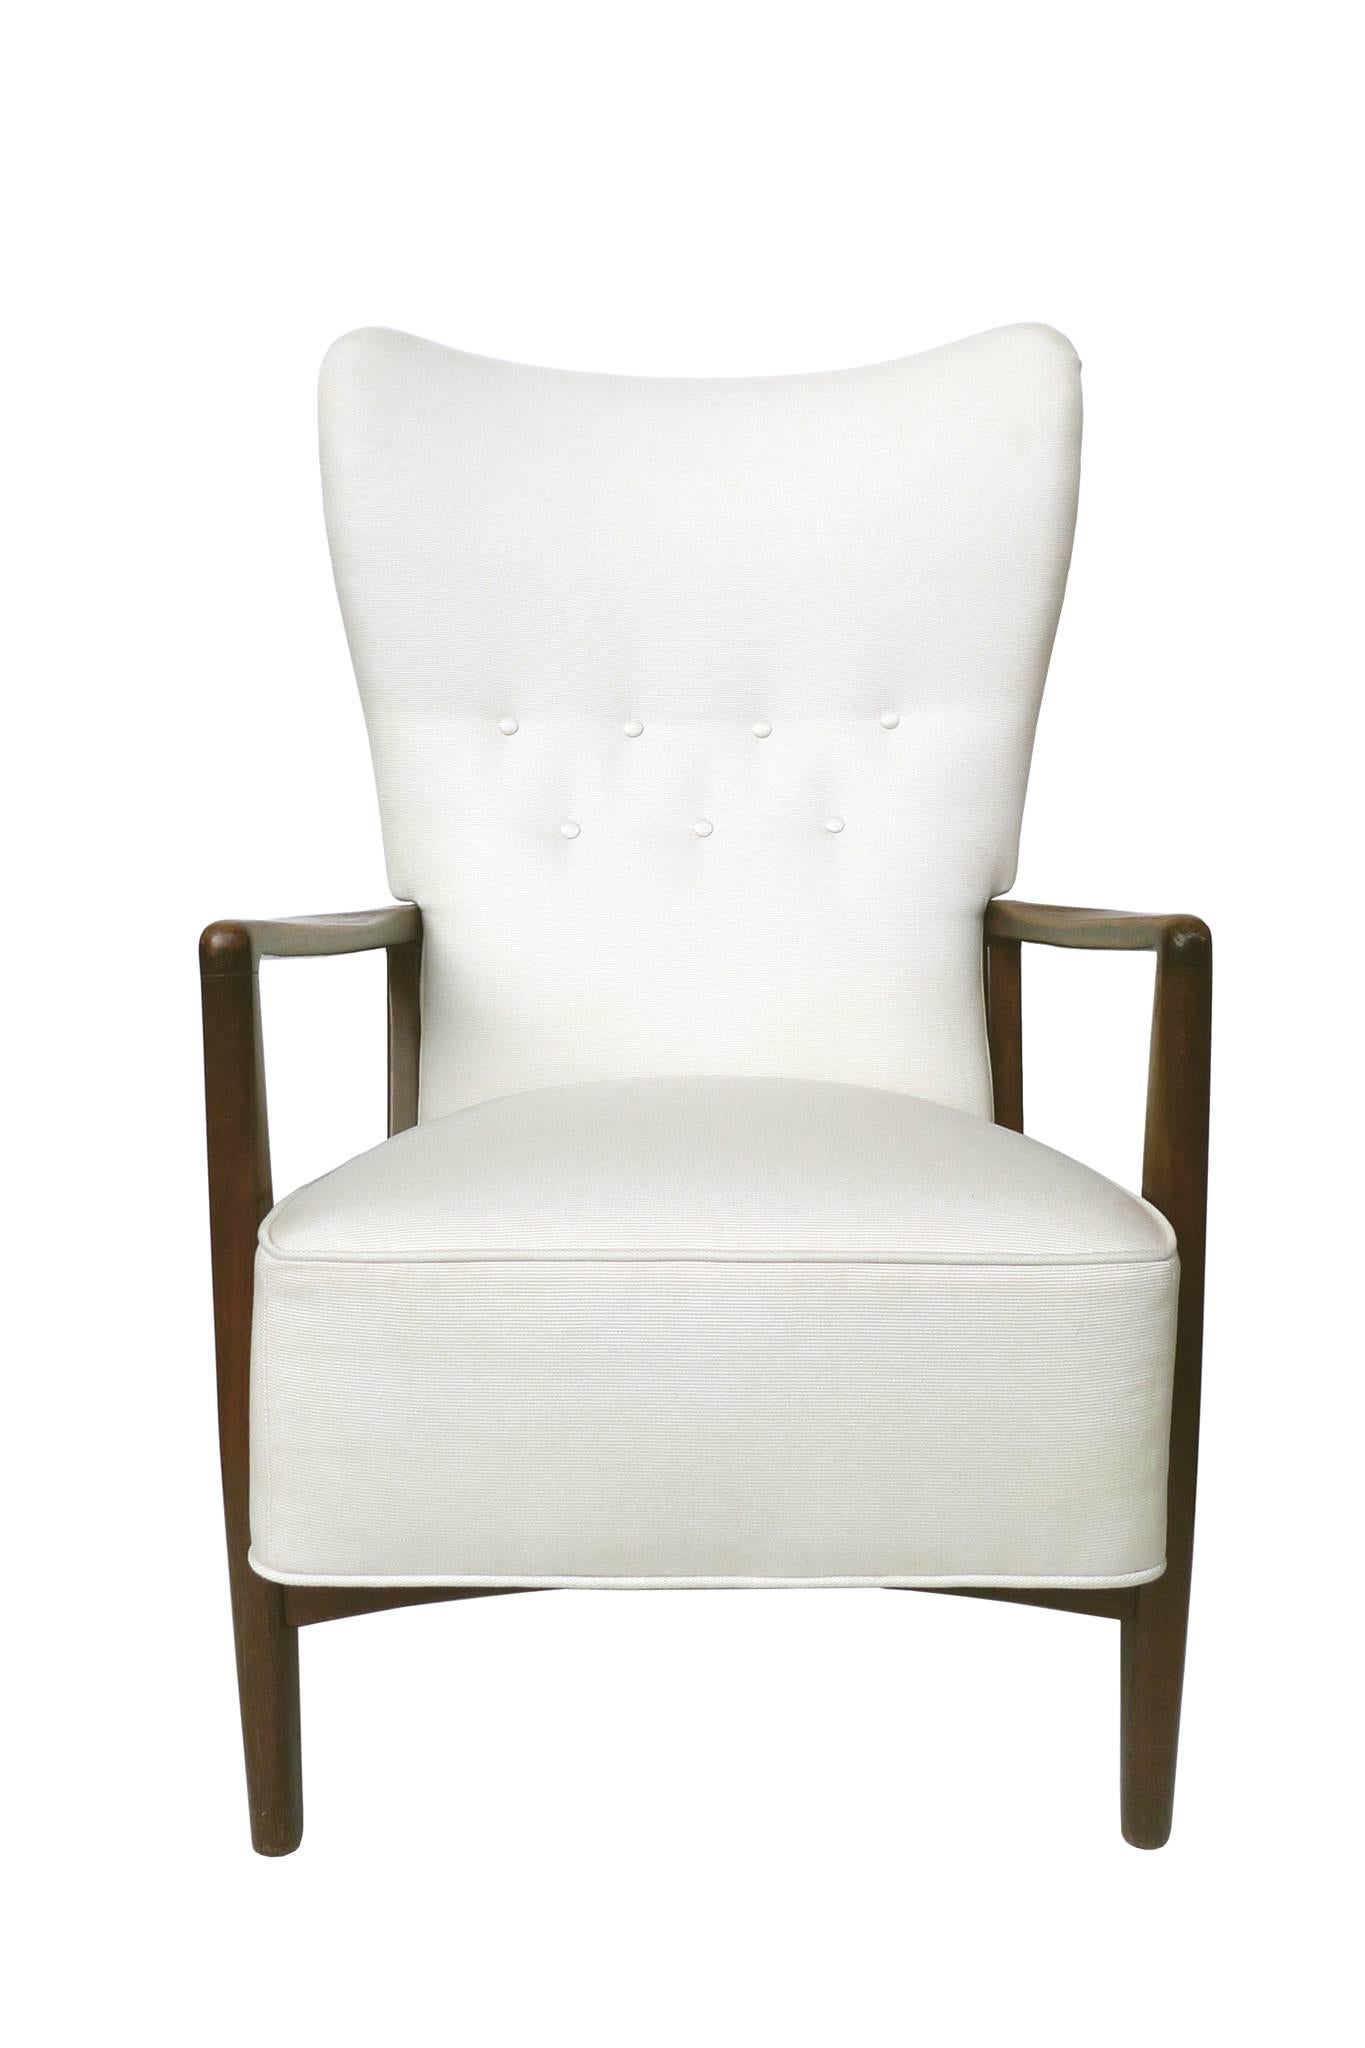 This beautiful 1940s set by Fritz Hansen is comprised of a settee and a wingback armchair, both button-tufted. They are newly reupholstered in an elegant white Duralee outdoor gabardine fabric. The hardwood arms and legs are in a dark walnut finish,